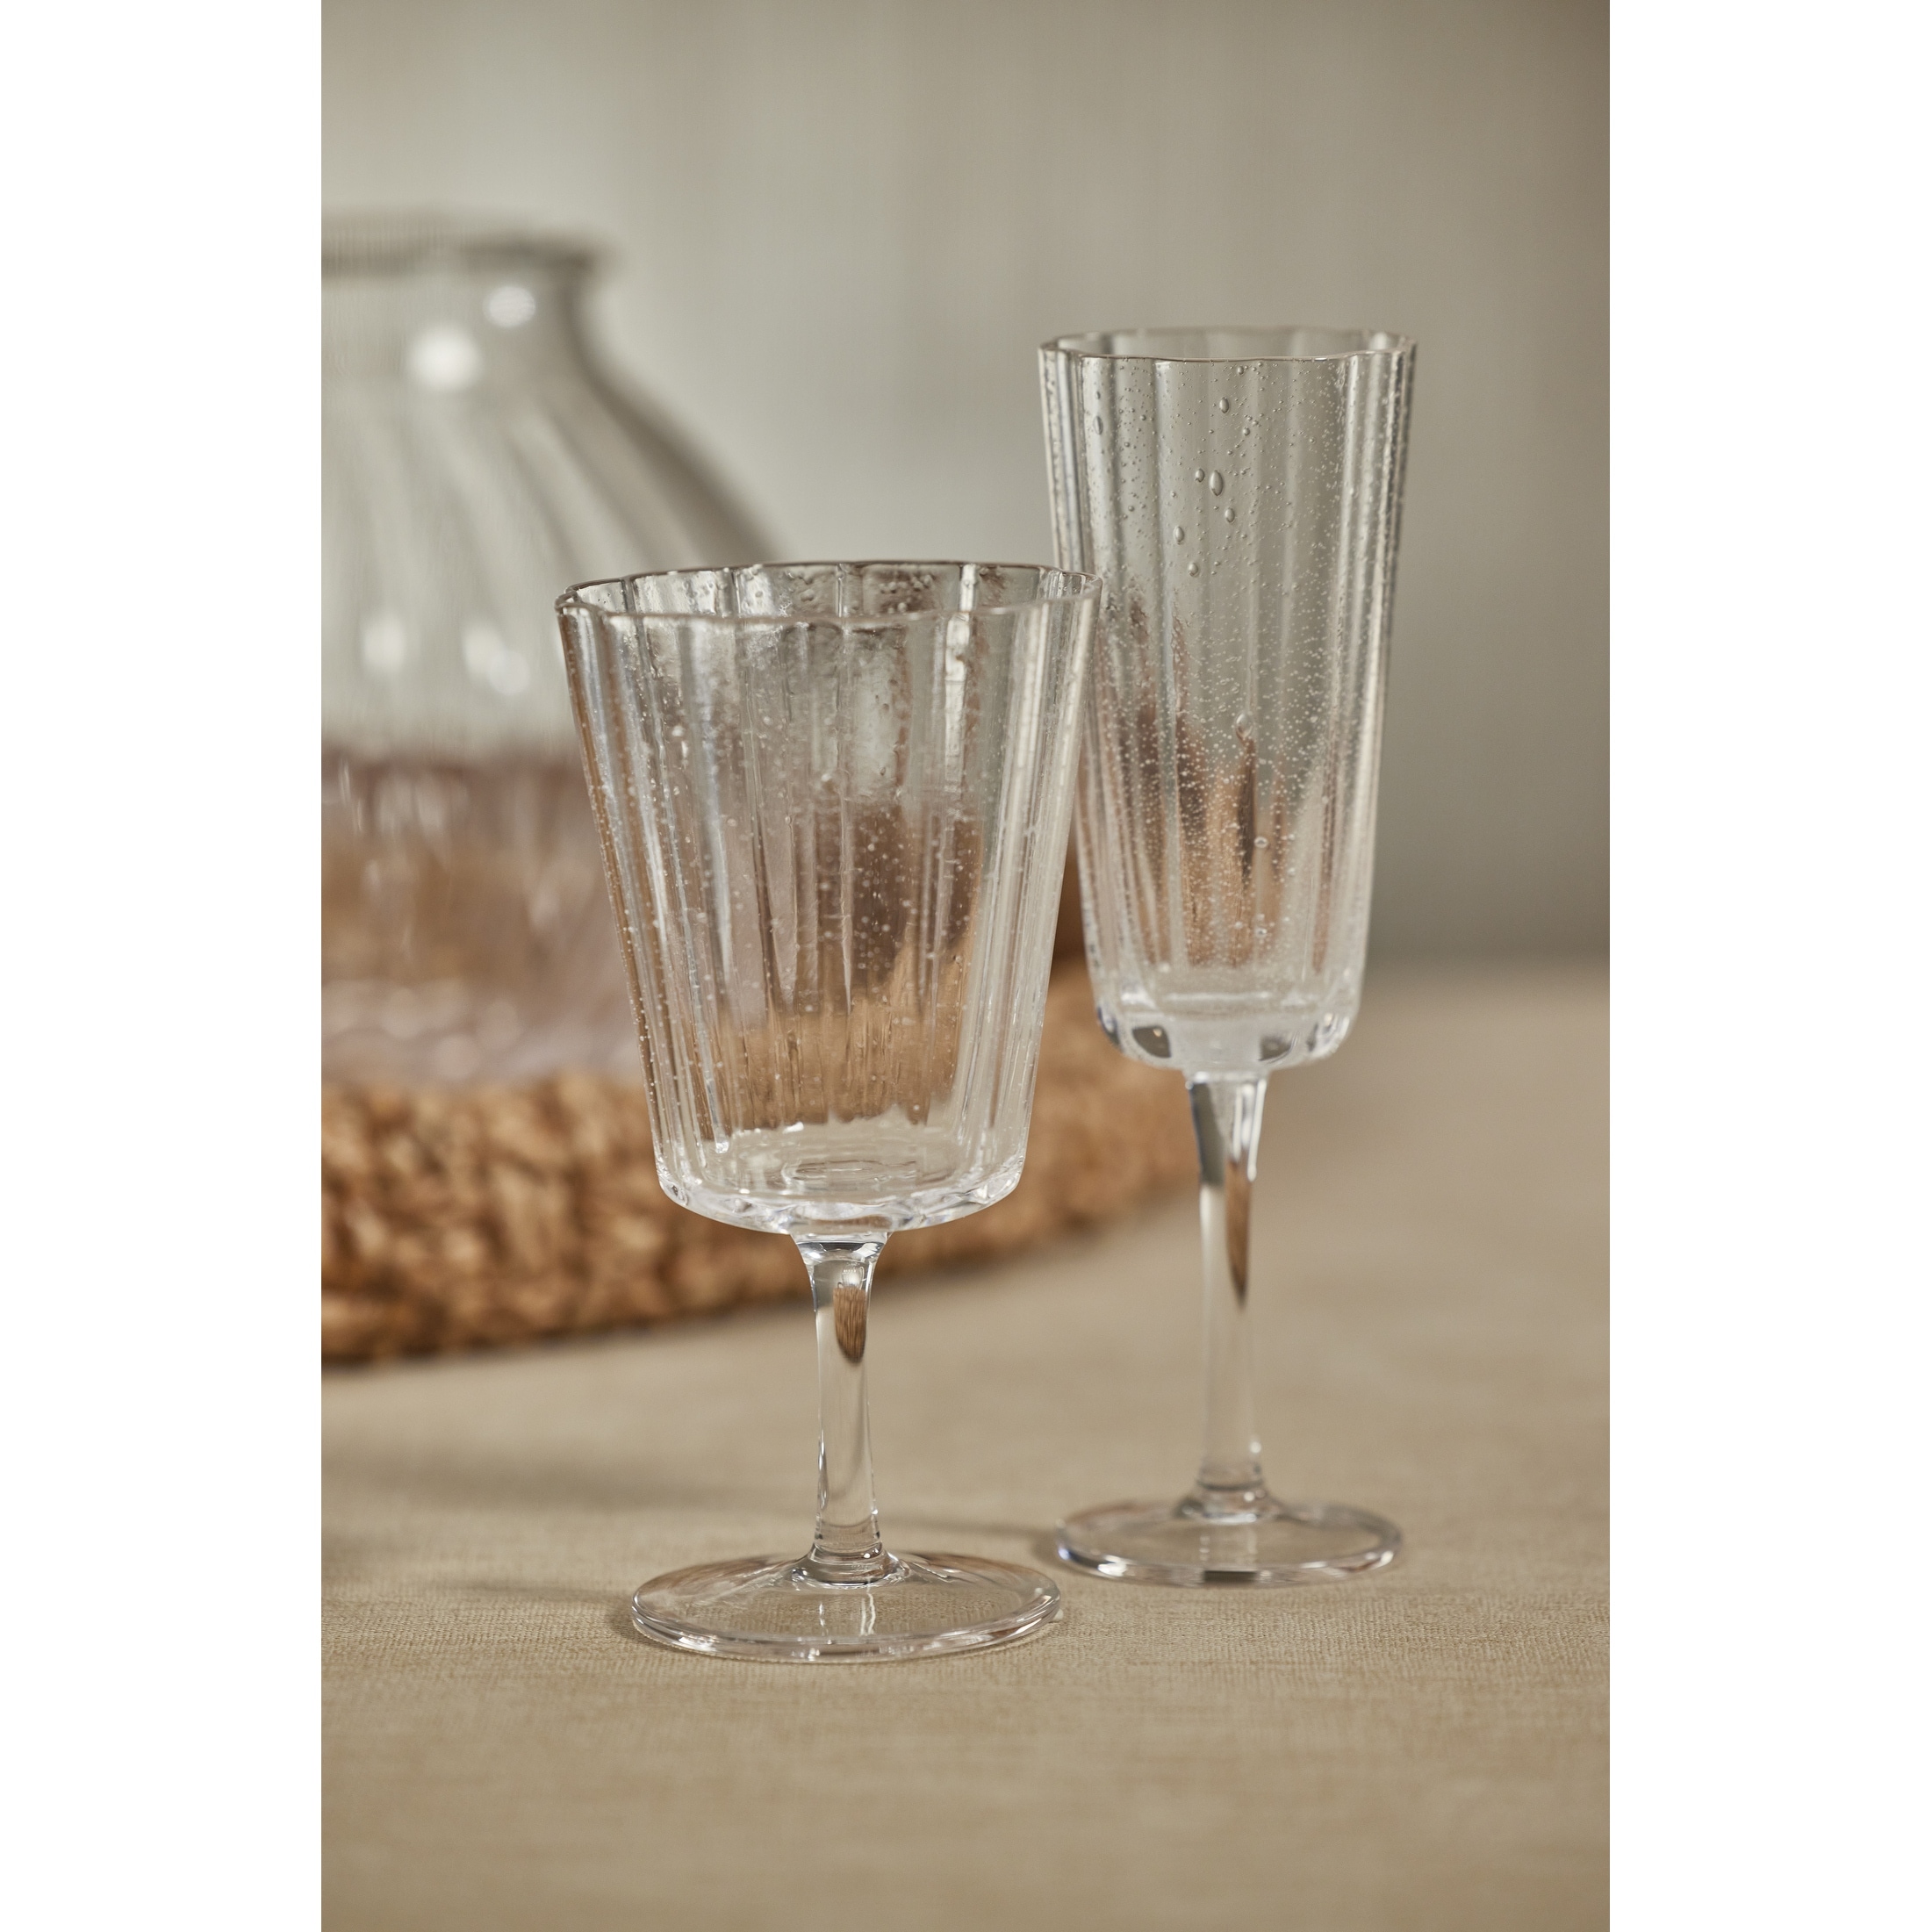 https://ak1.ostkcdn.com/images/products/is/images/direct/204be22e8e8f2a9ae5f9a1f2950b71b244a648c8/Forli-Bubble-Champagne-Flutes%2C-Set-of-4.jpg